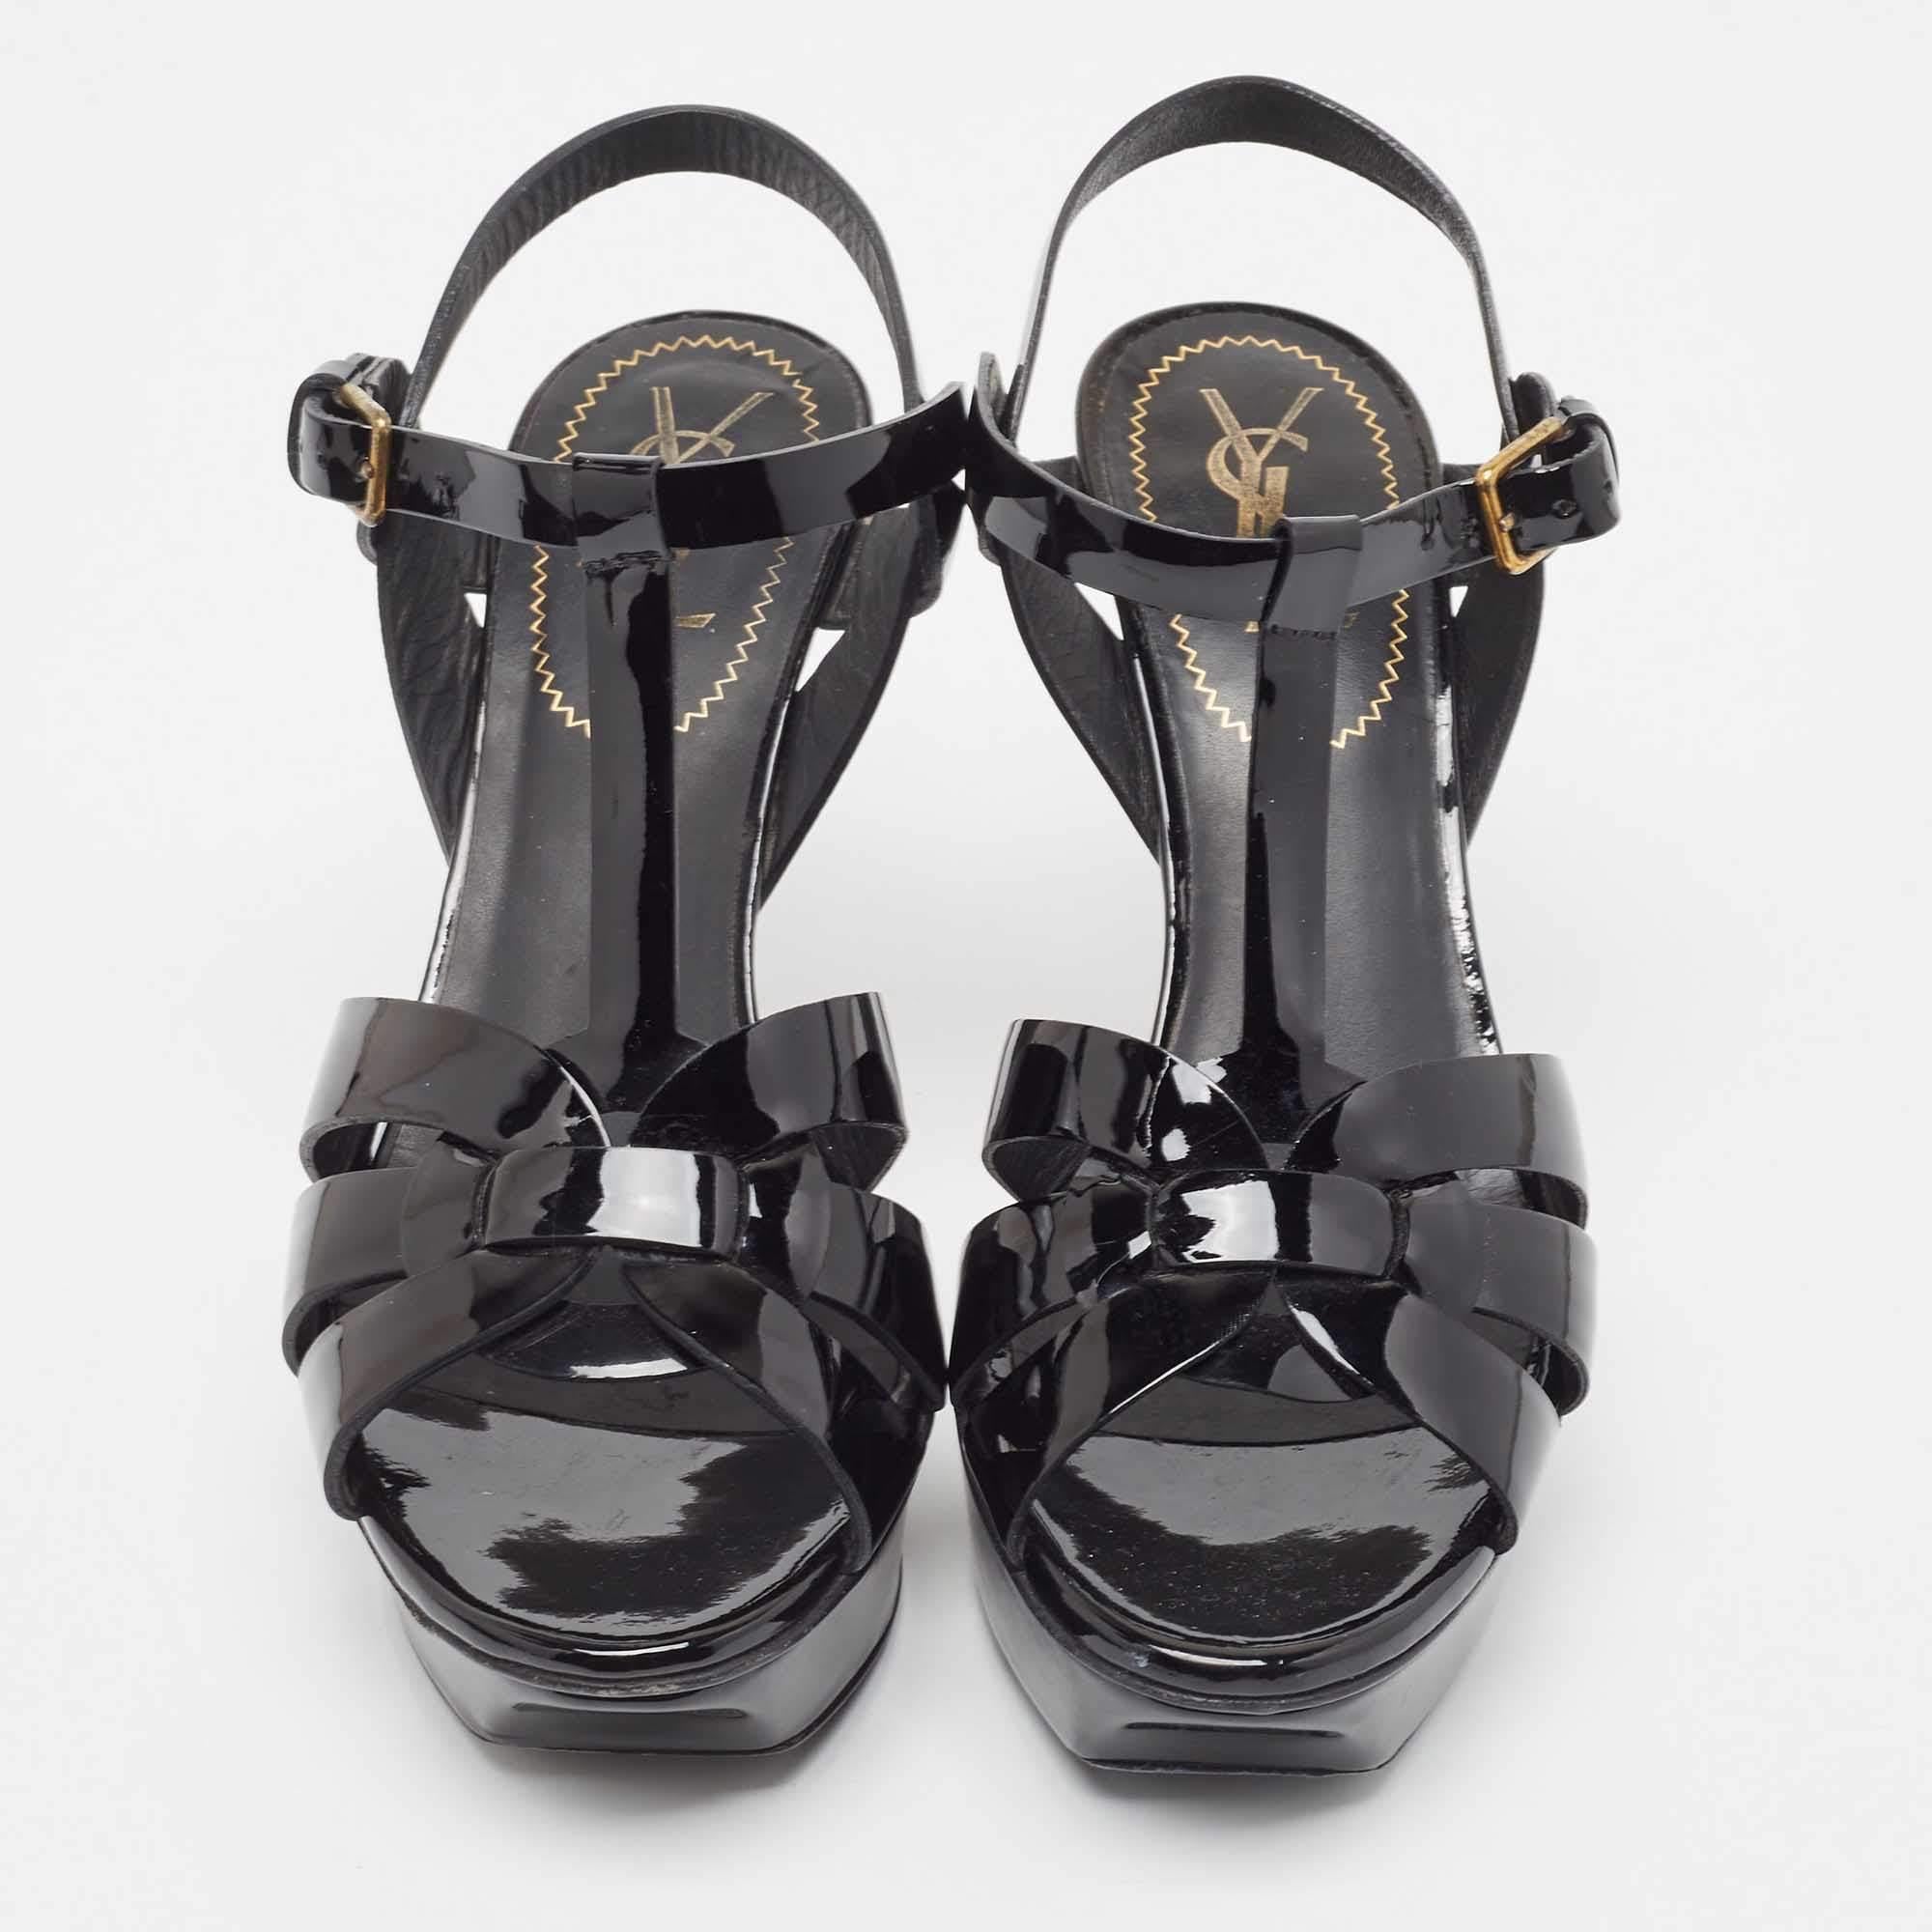 You can count on these YSL black sandals for an elevated feel. They are crafted beautifully and designed to offer the right fit and a comfortable lift.

Includes: Original Dustbag